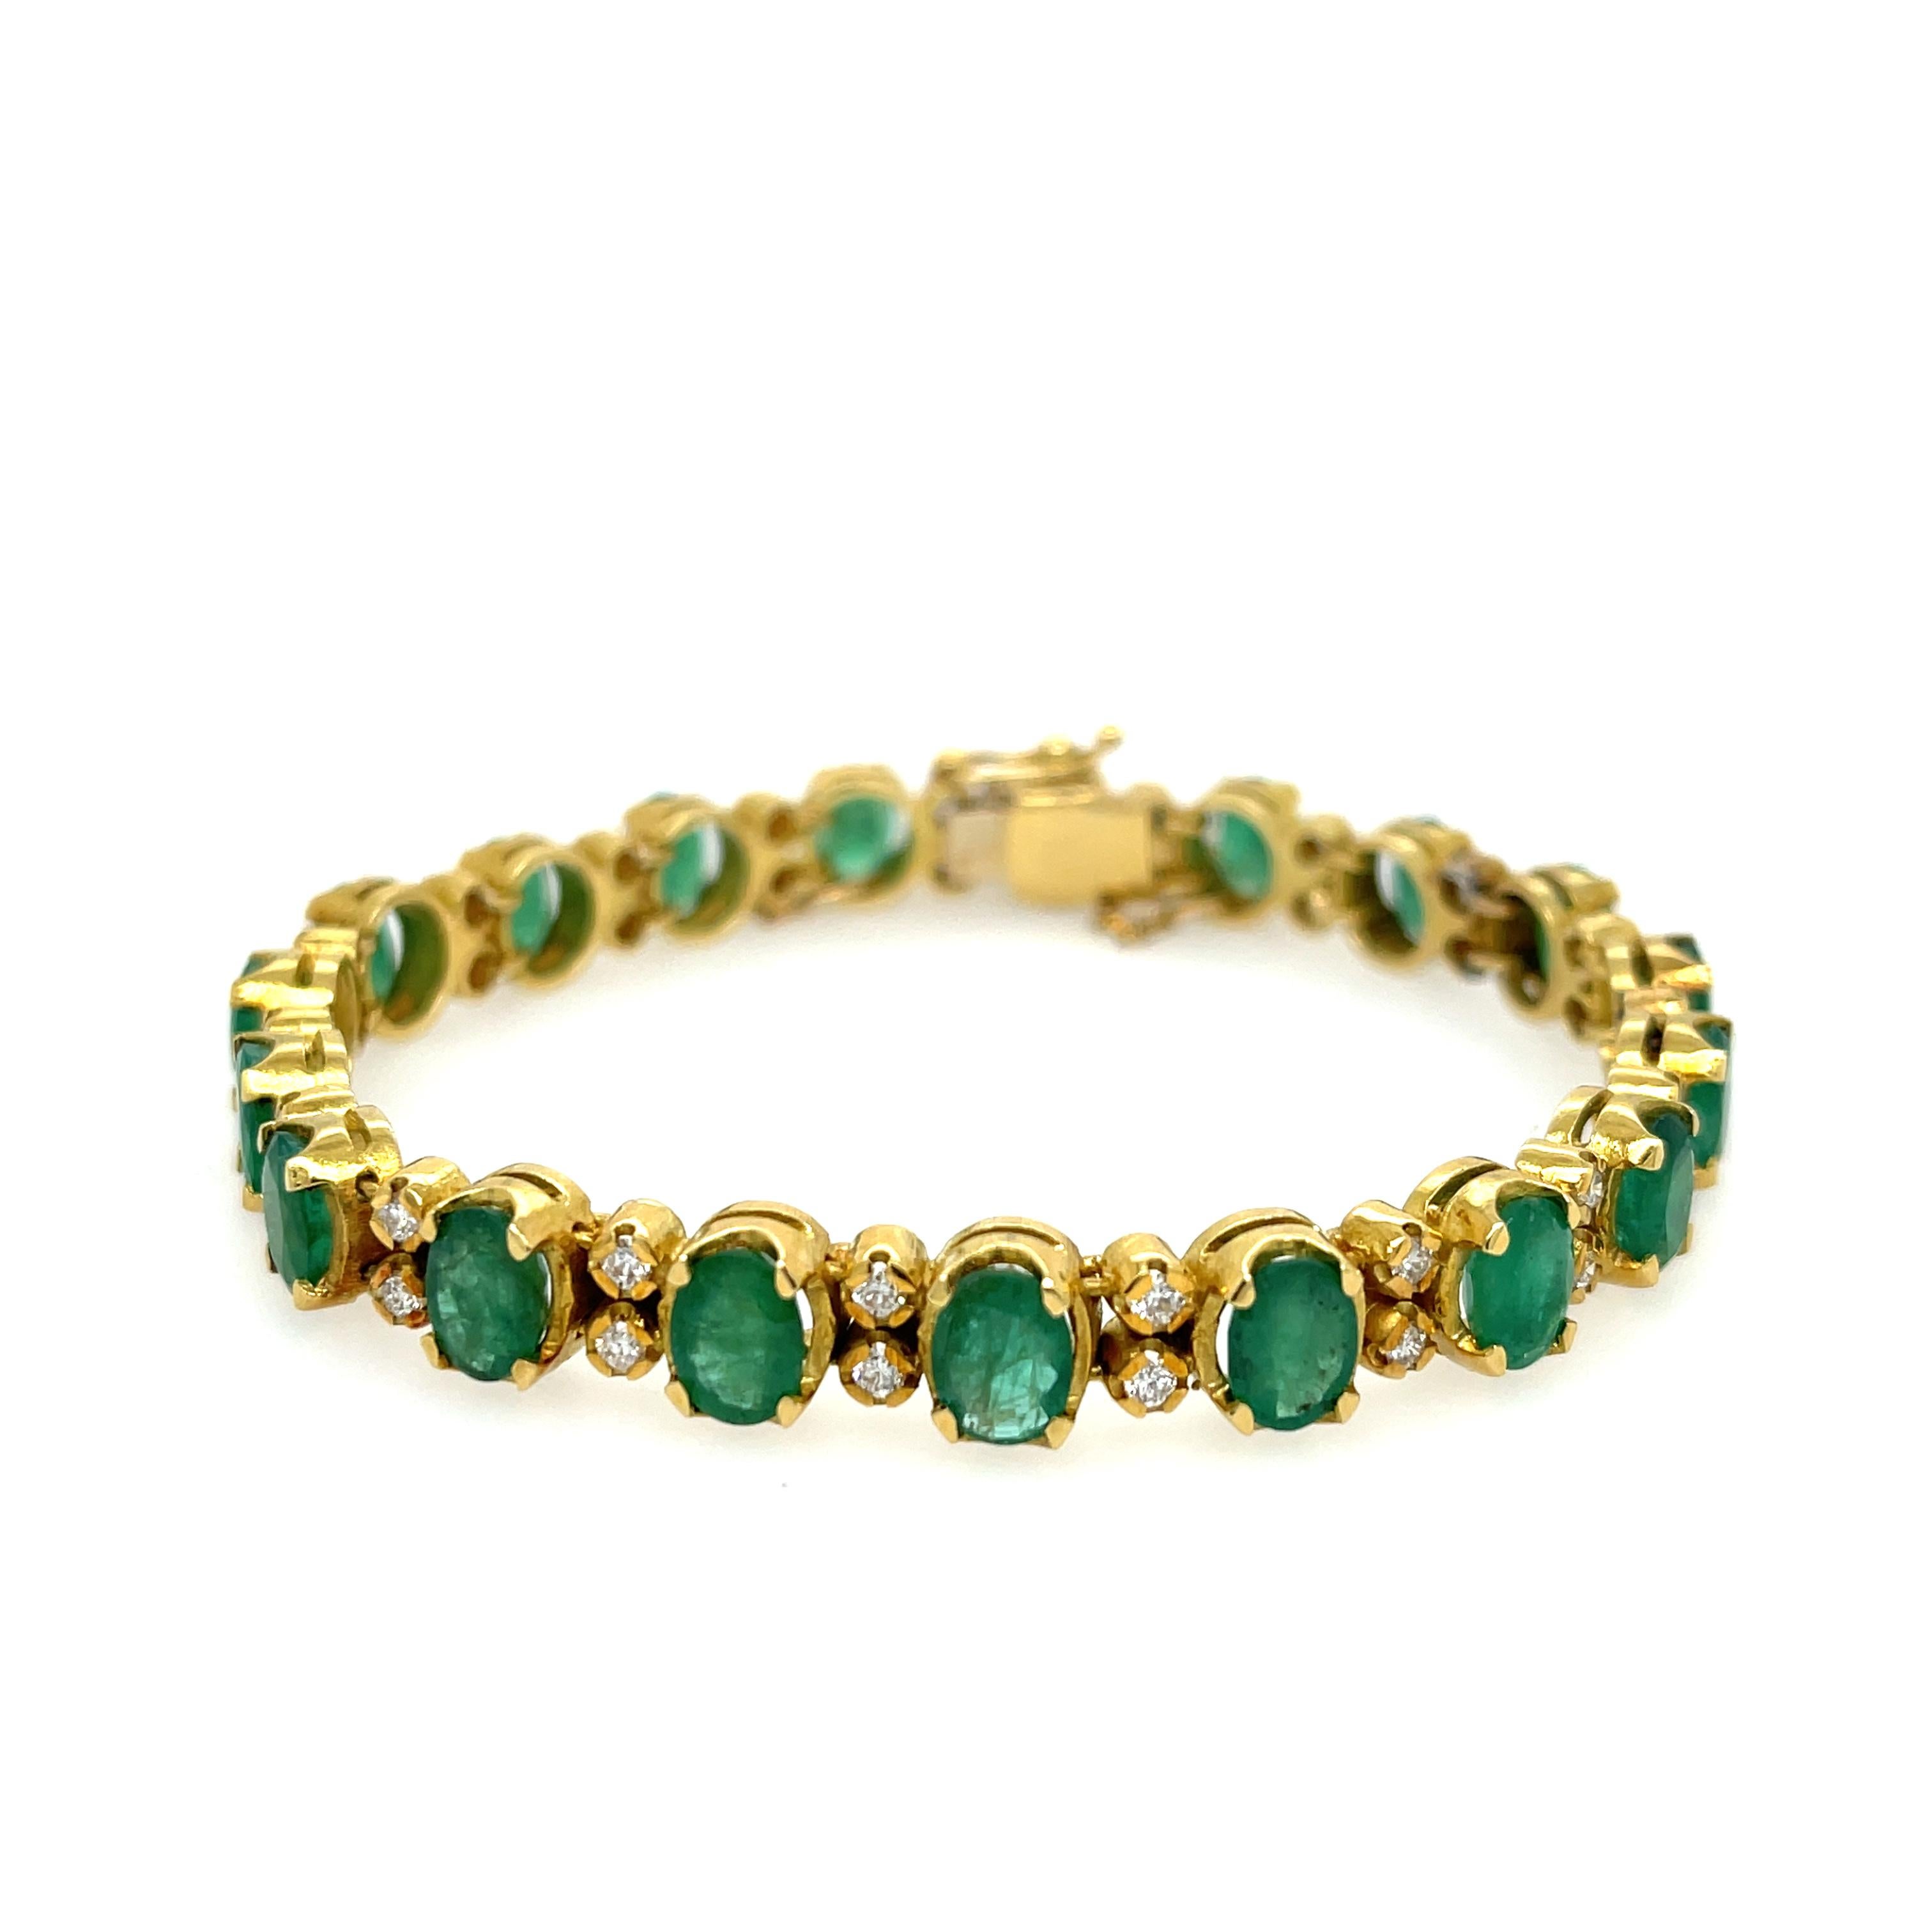 Oval Emerald and Diamond Bracelet in 18K Yellow Gold. The bracelet features 19 oval cut emeralds with 16.3ctw and 38 round diamonds with 1.22ctw.
7